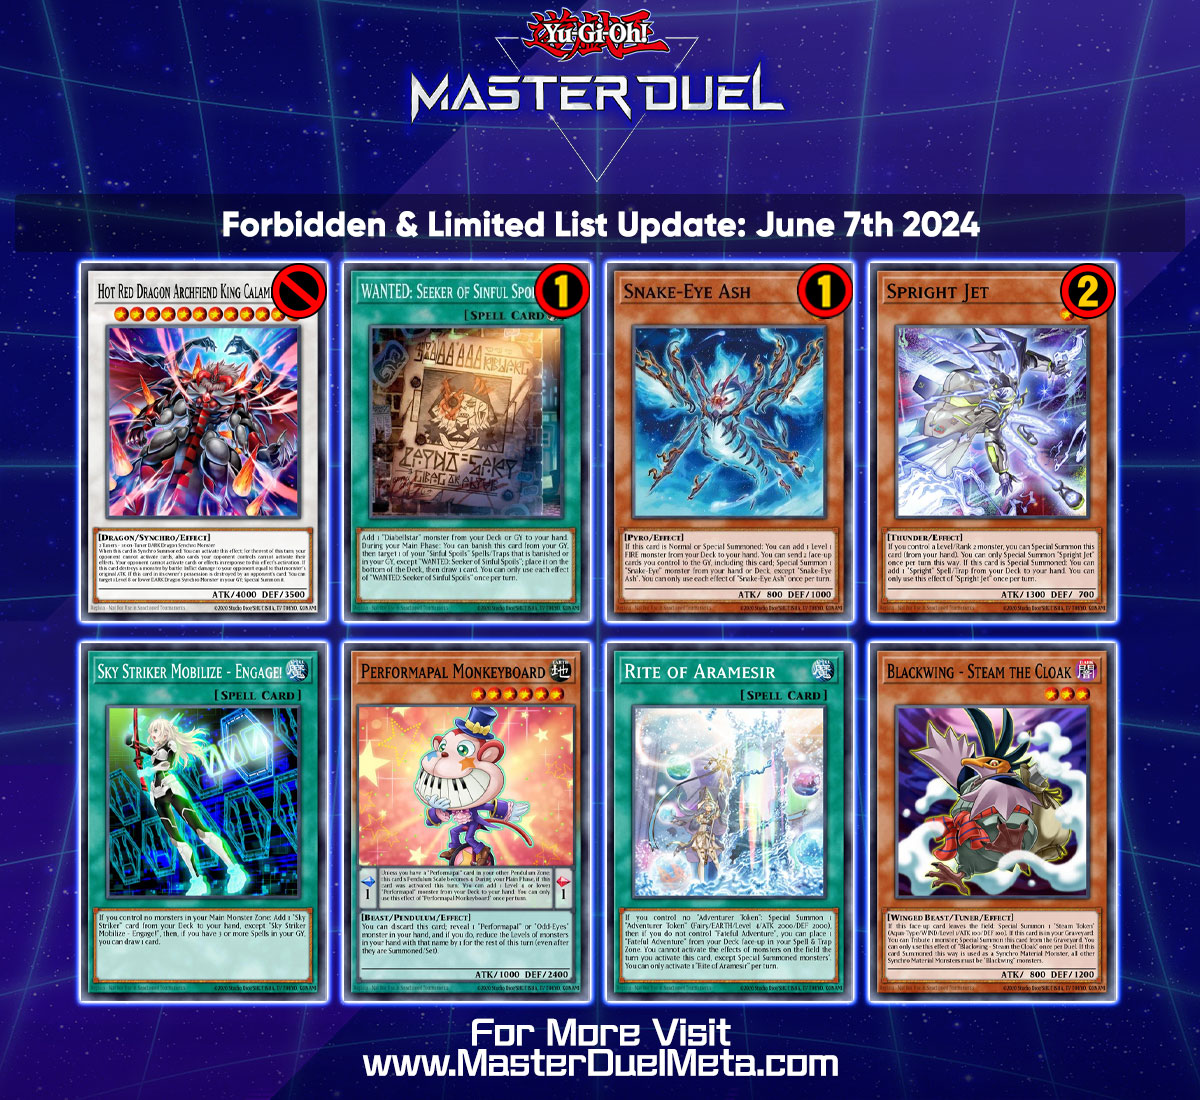 A new Forbidden & Limited List has been announced for Yu-Gi-Oh! Master Duel, going live on June 7th 2024!

Full Changes: masterduelmeta.com/articles/news/…

#MasterDuel #YuGiOh #YuGiOhMasterDuel #遊戯王マスターデュエル